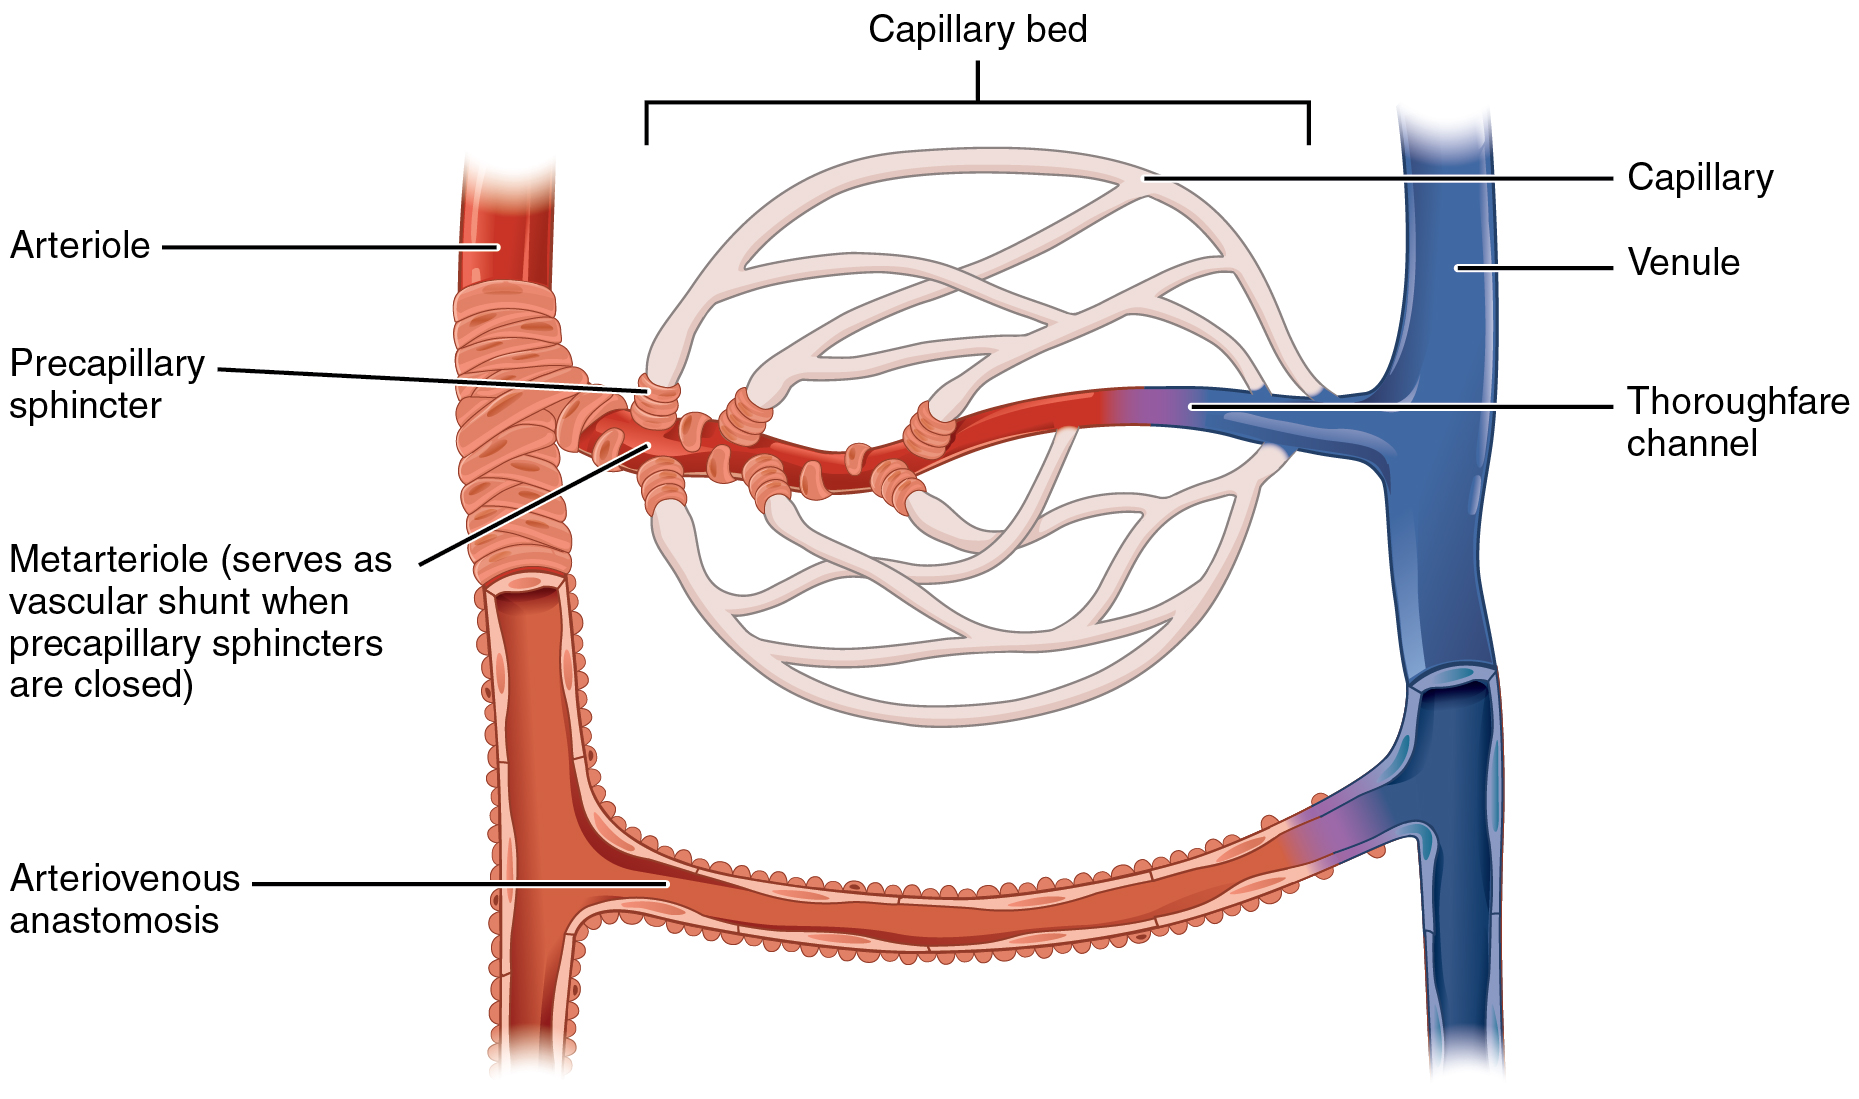 This diagram shows a capillary bed connecting an arteriole and a venule.